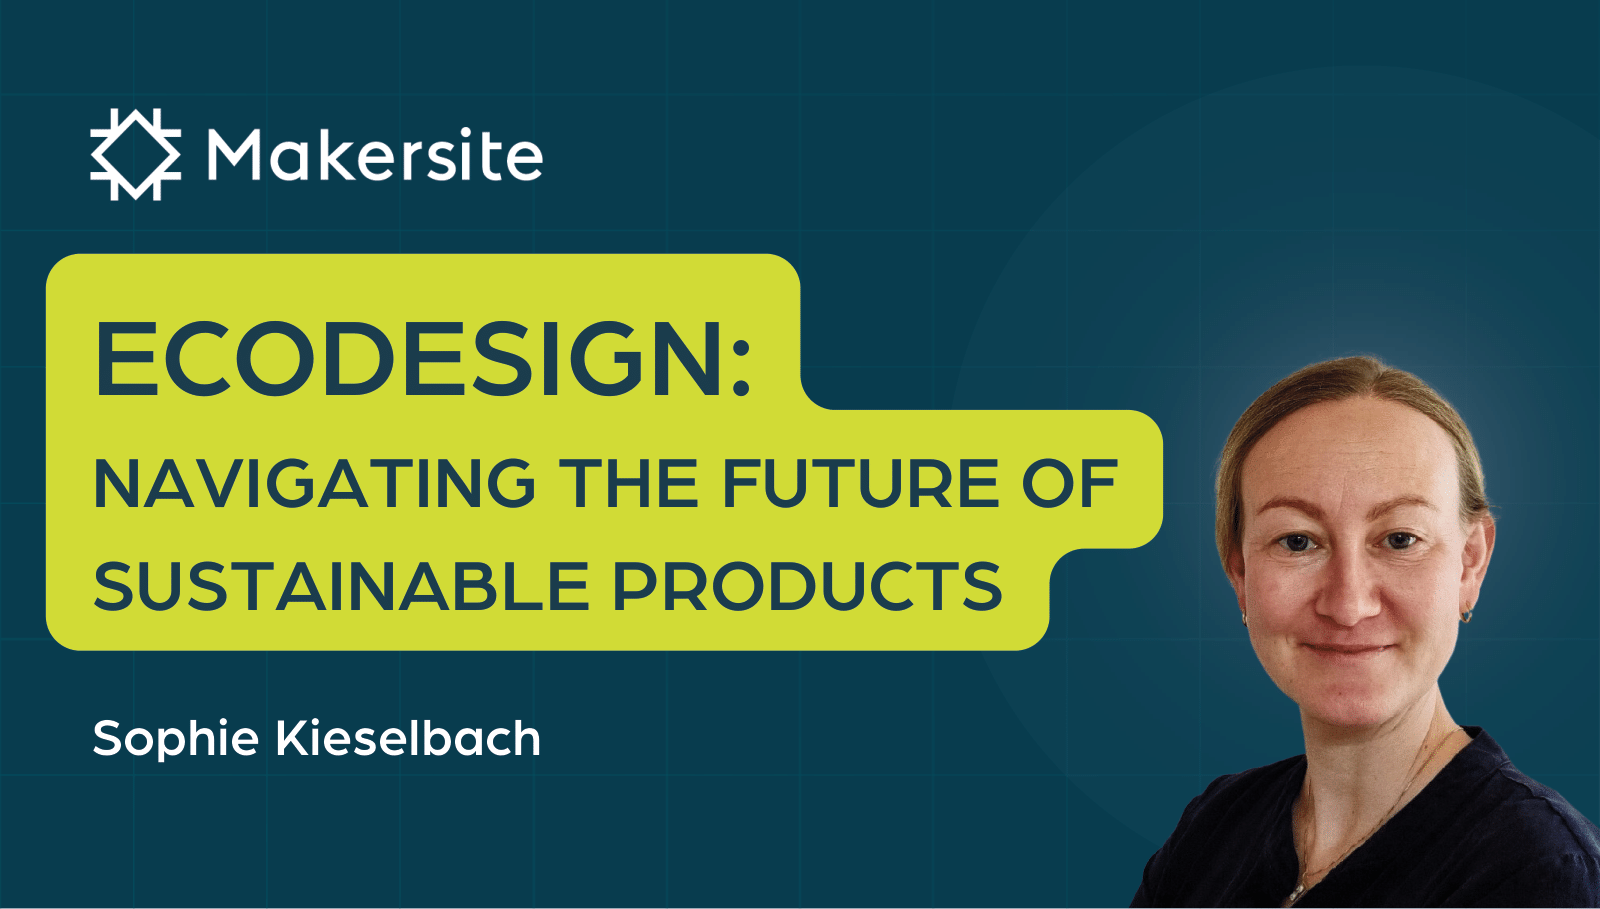 The emergence of eco-design: Navigating the future of sustainable products